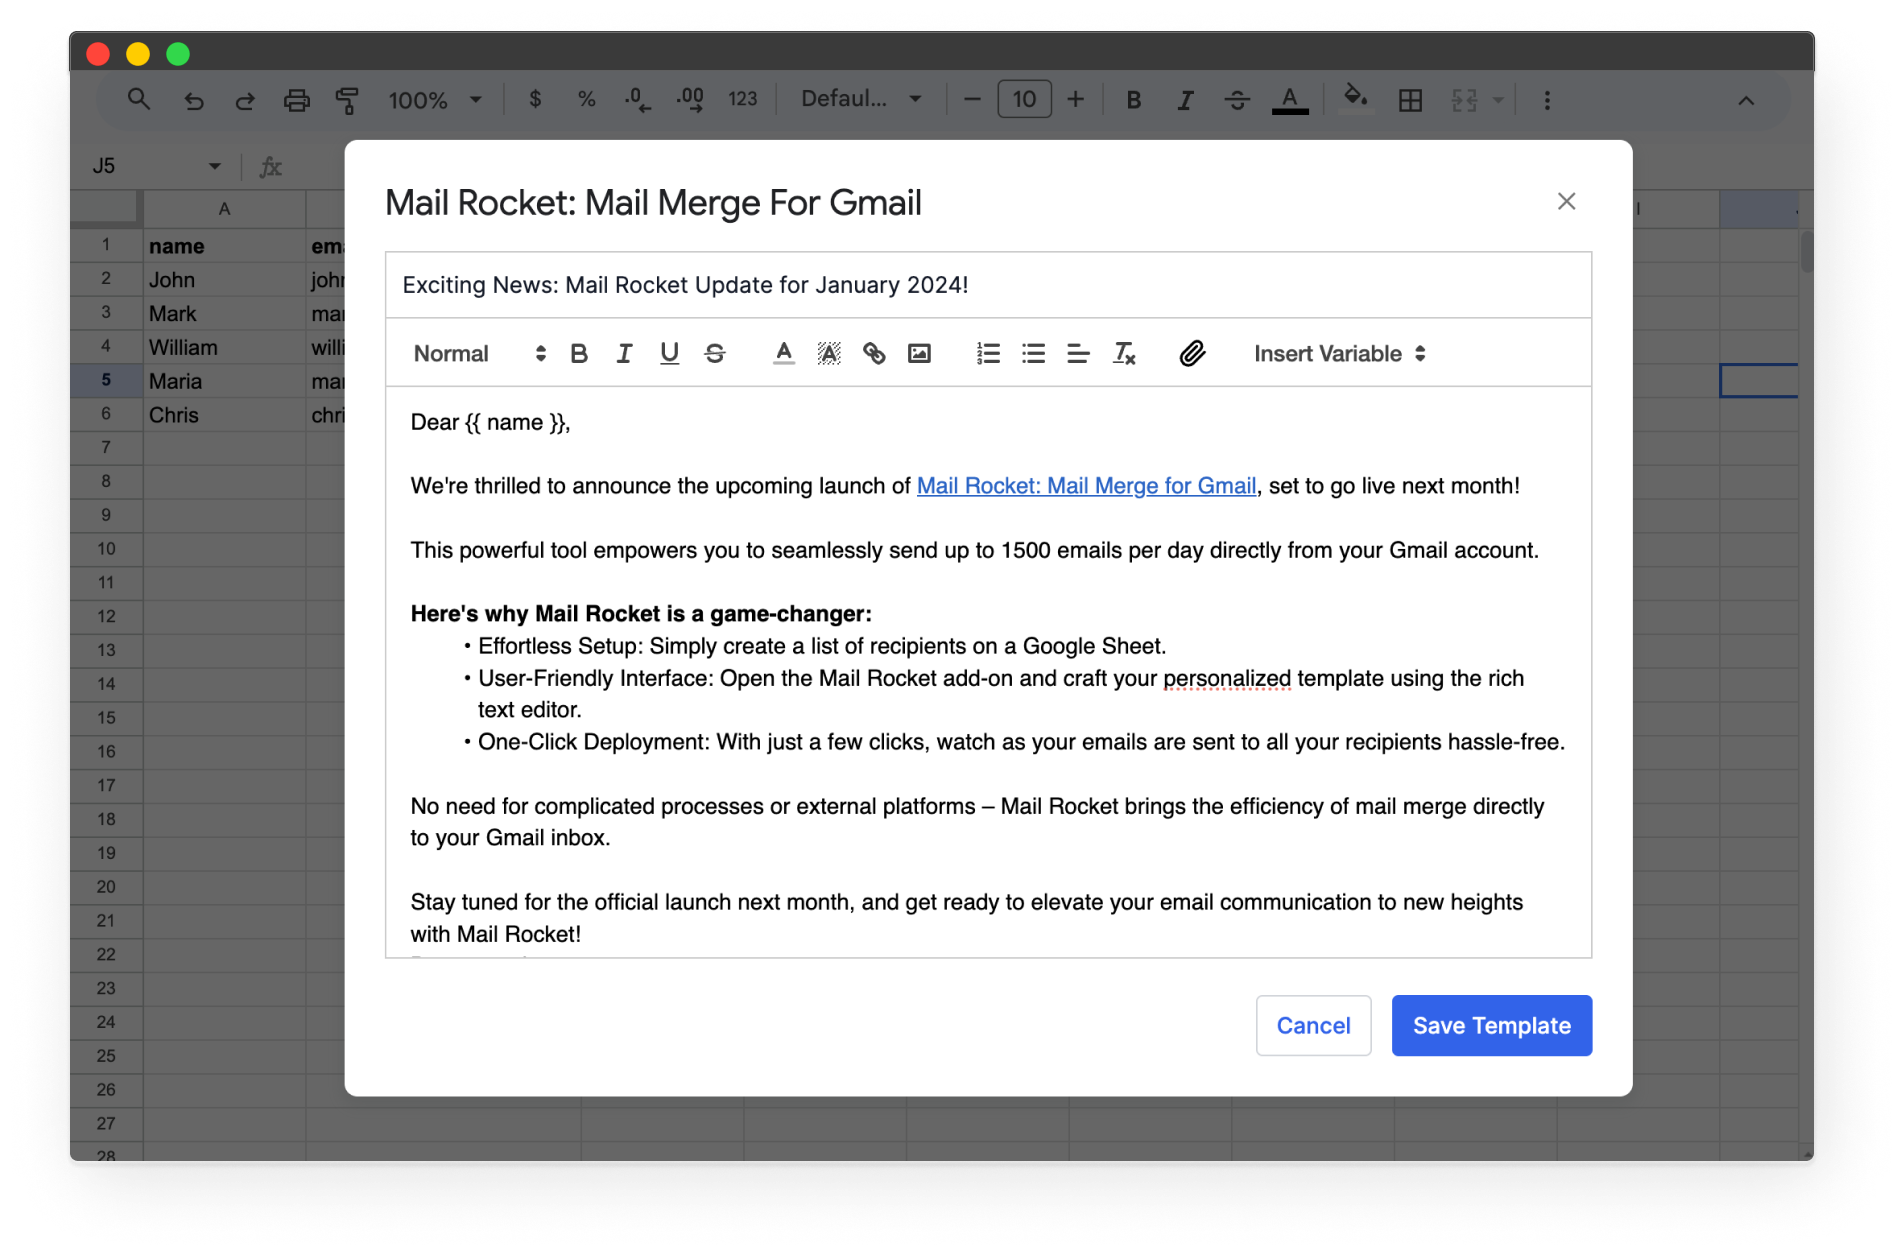 Mail Rocket: mail merge for gmail